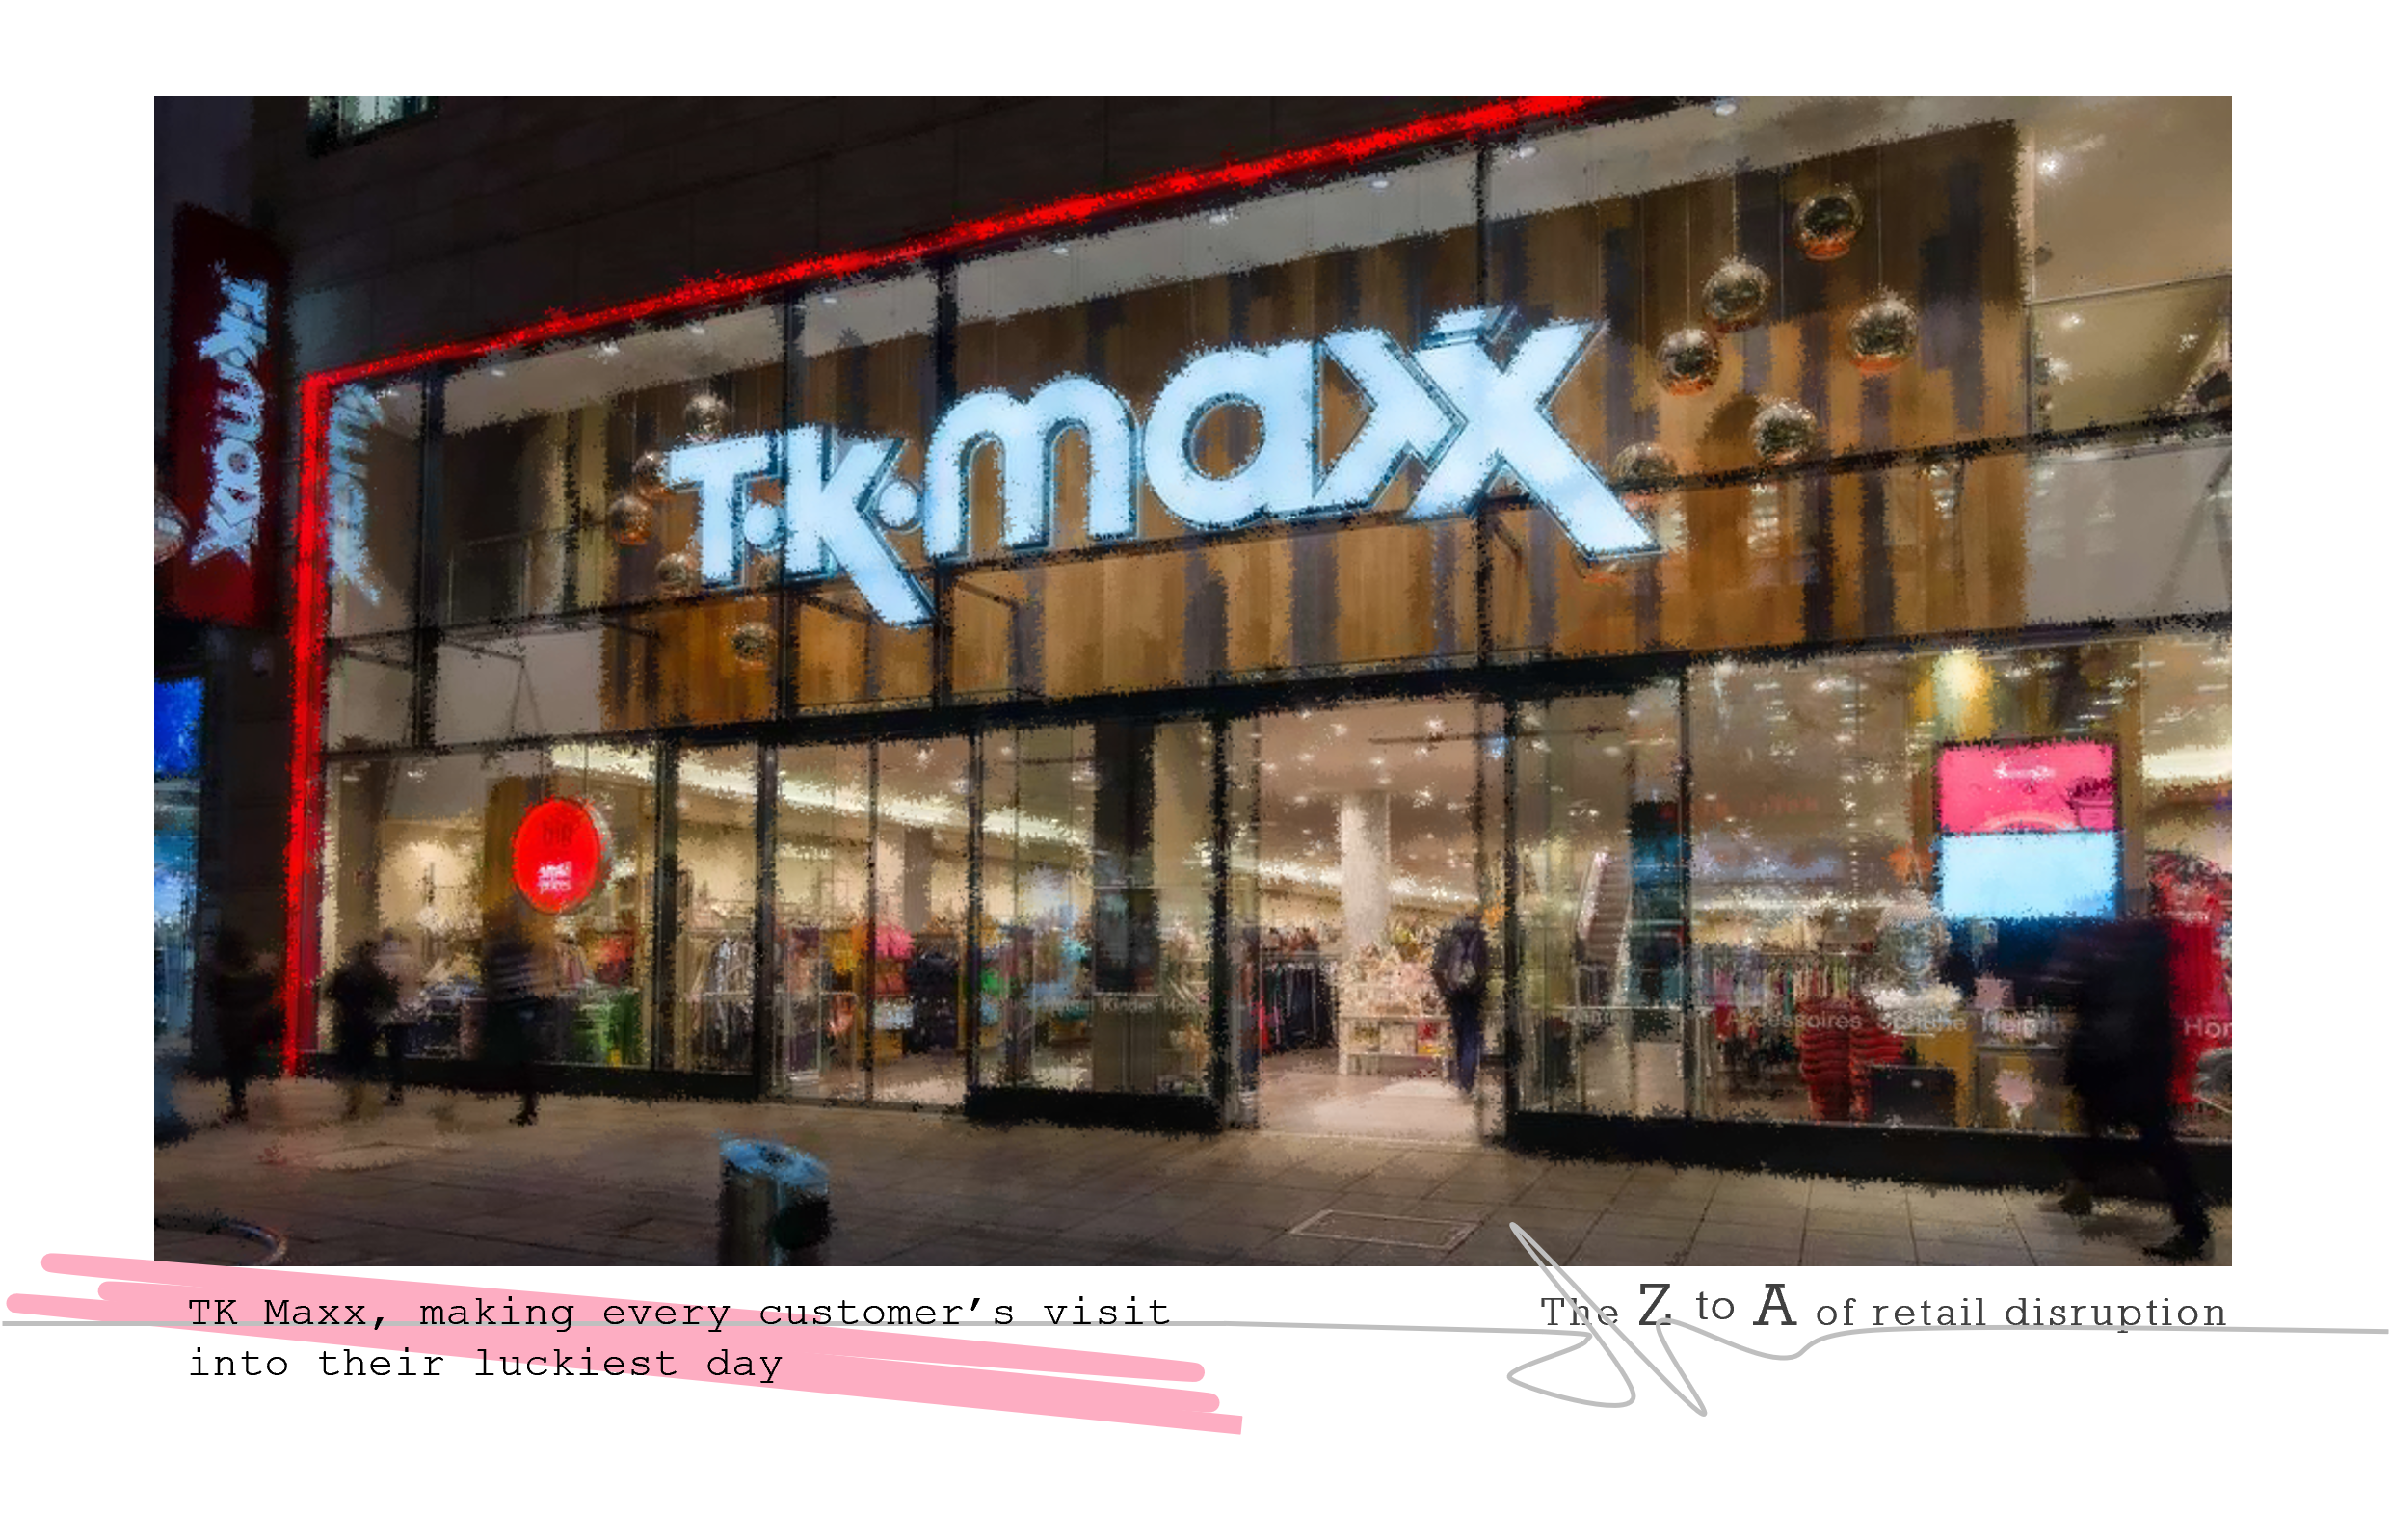 https://vmunleashed.com/wp-content/uploads/2022/08/tk-maxx-every-customers-luckiest-day.png